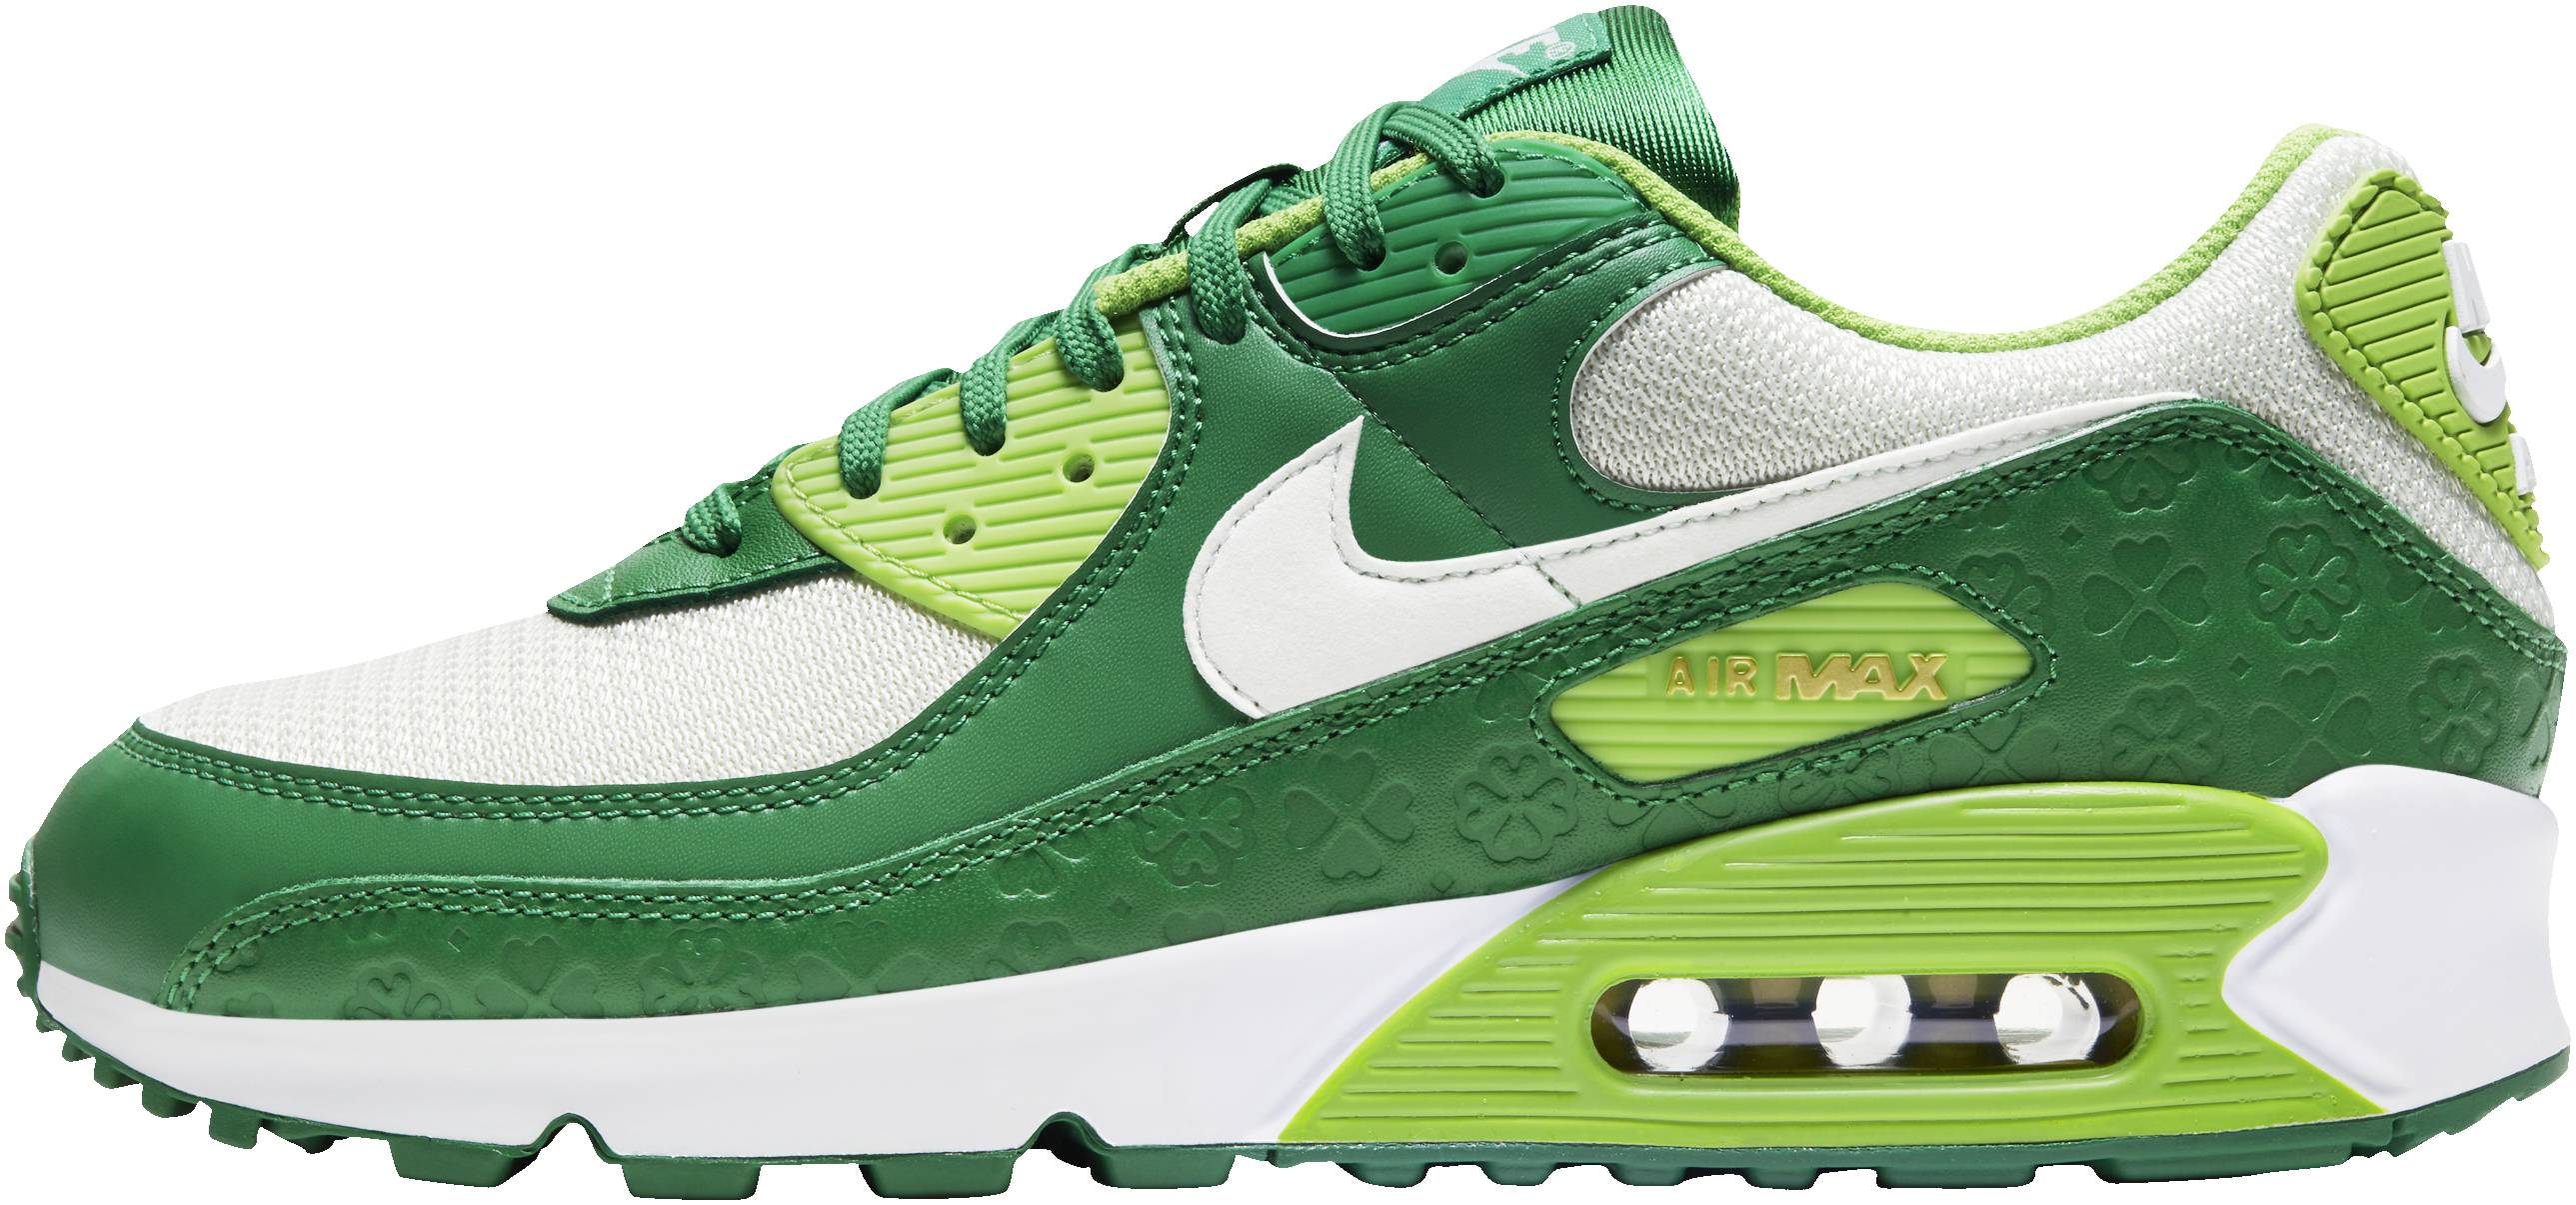 93 Green green and white air max Nike sneakers: Save up to 44% | RunRepeat